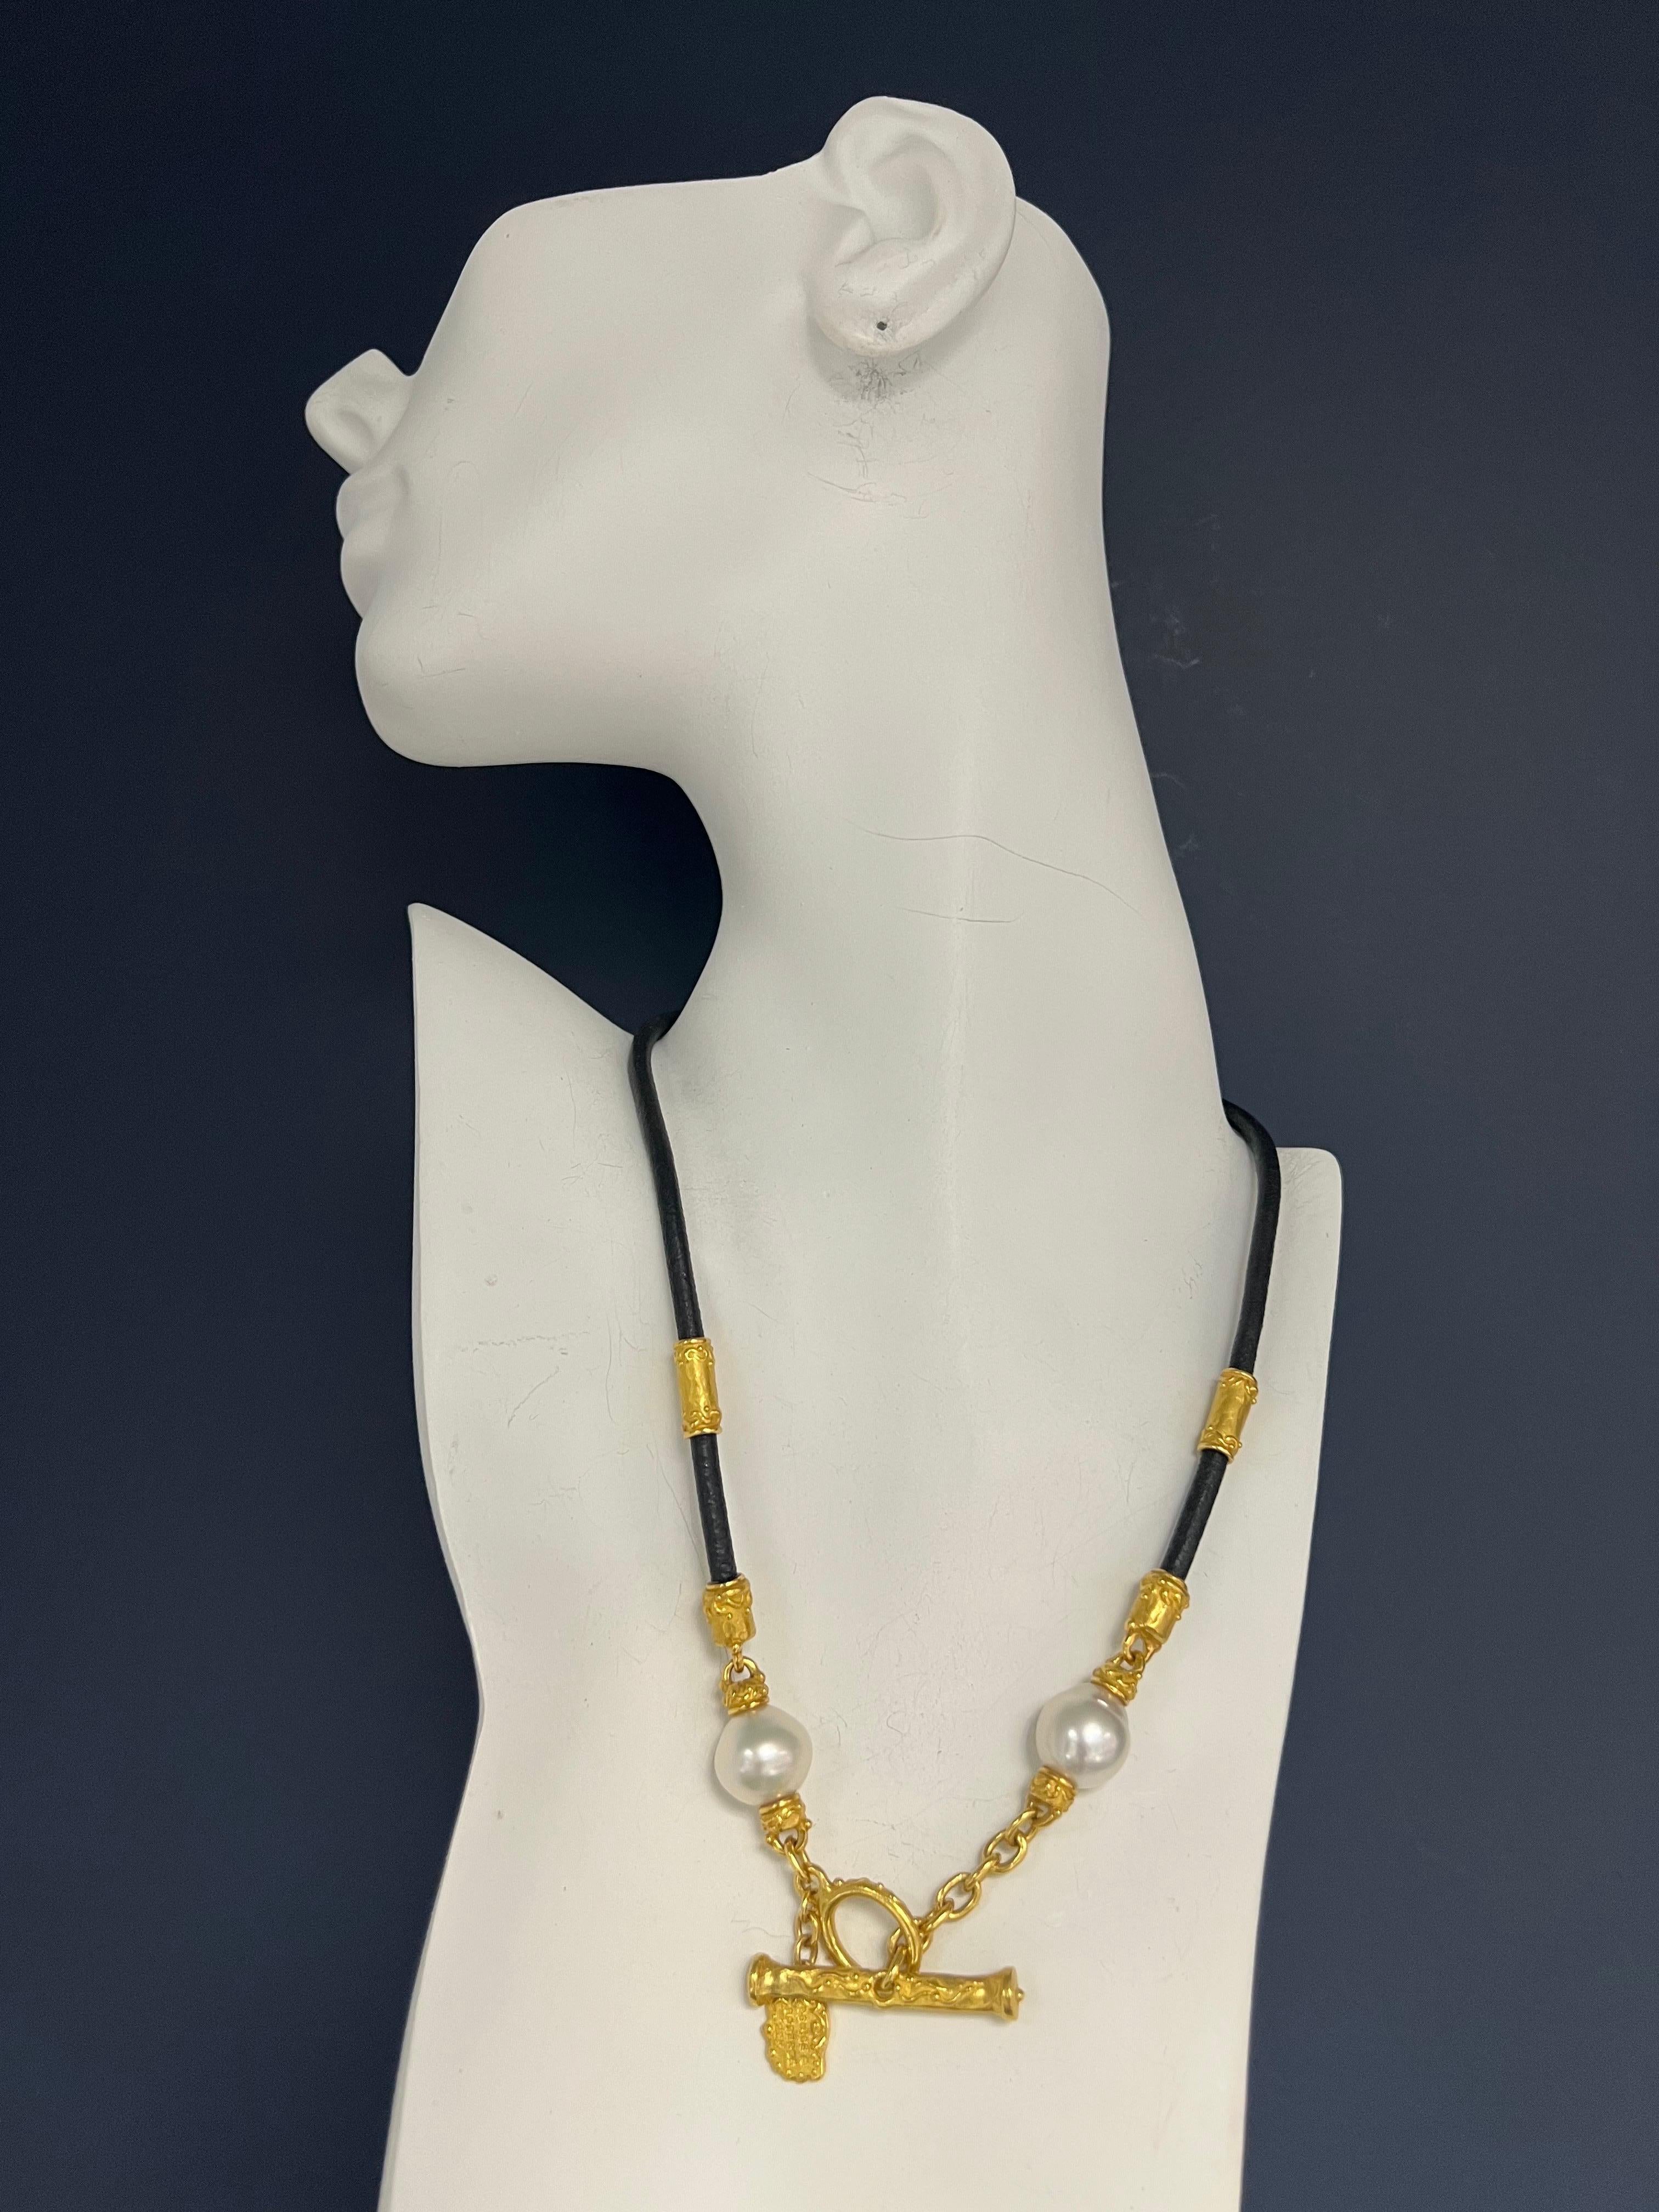 An original signed Denise Roberge 22k Yellow Gold necklace set with two White South Sea pearls, one is 13mm and the other is14mm in diameter. The luster is excellent. The necklace is set with a 22k Yellow Gold Toggle clasp. Total length is 17.5”